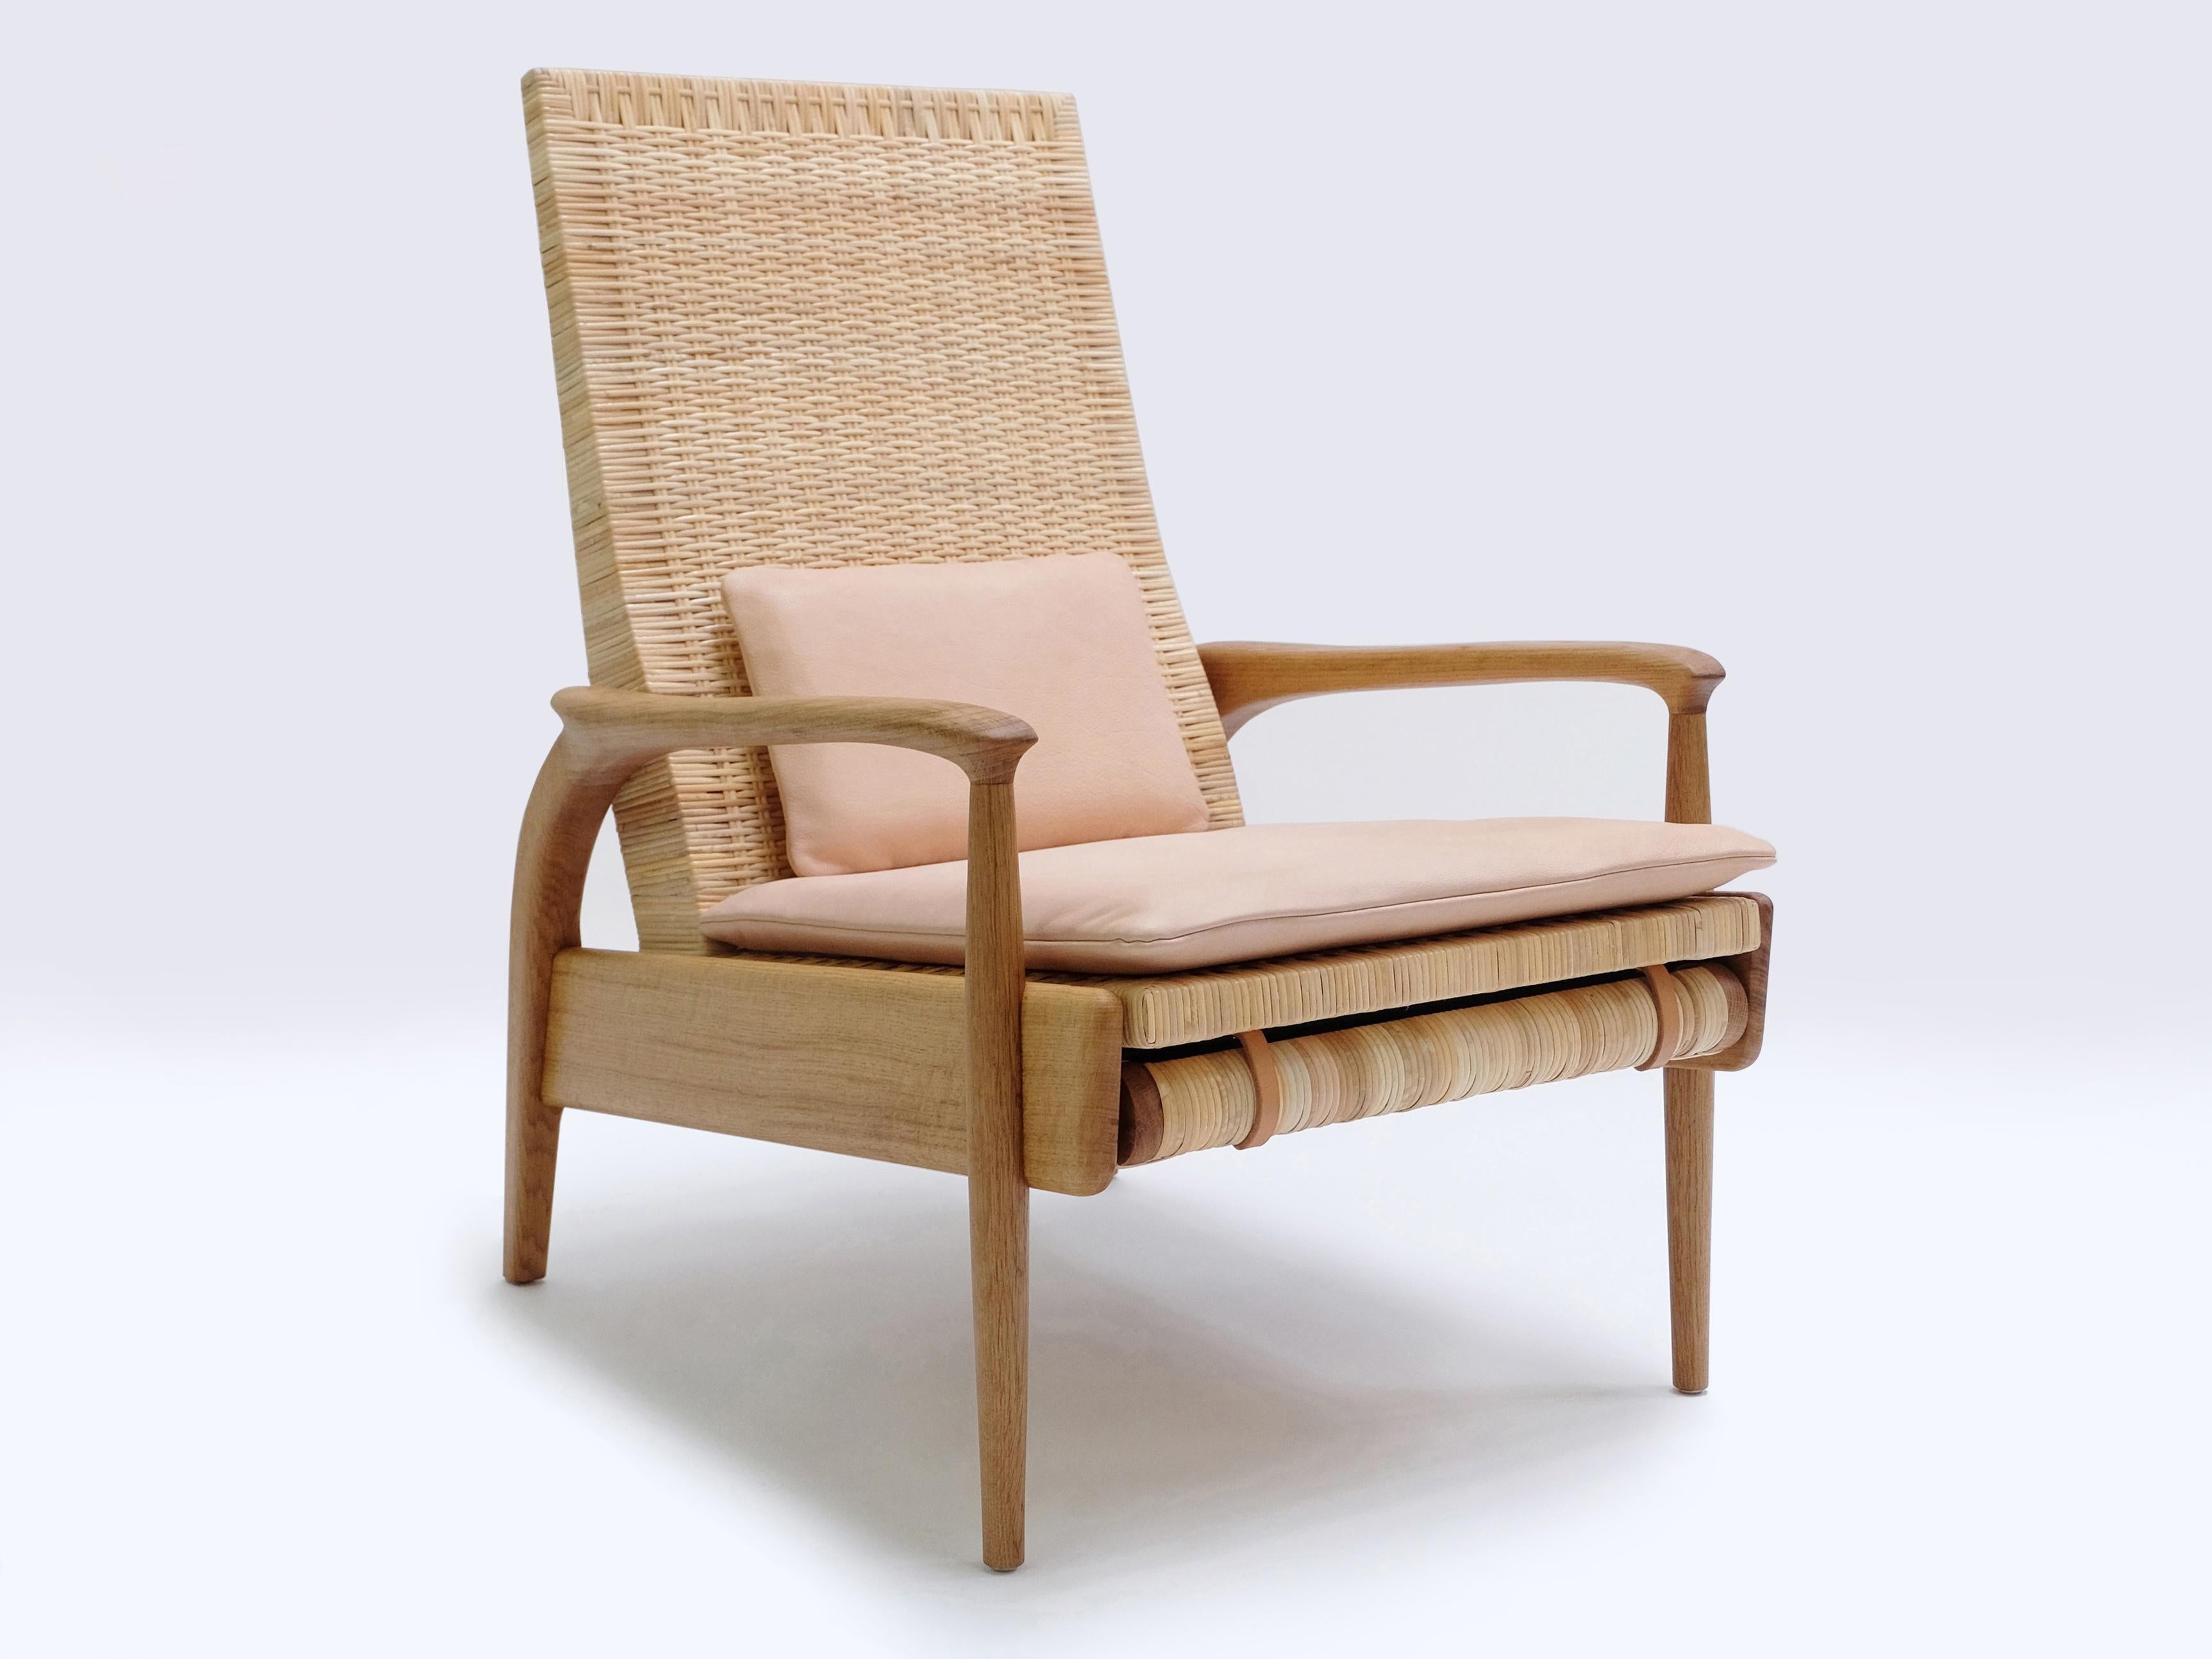 Pair of Reclining Armchairs, Solid Oak, Handwoven Natural Cane, Leather Cushions For Sale 8